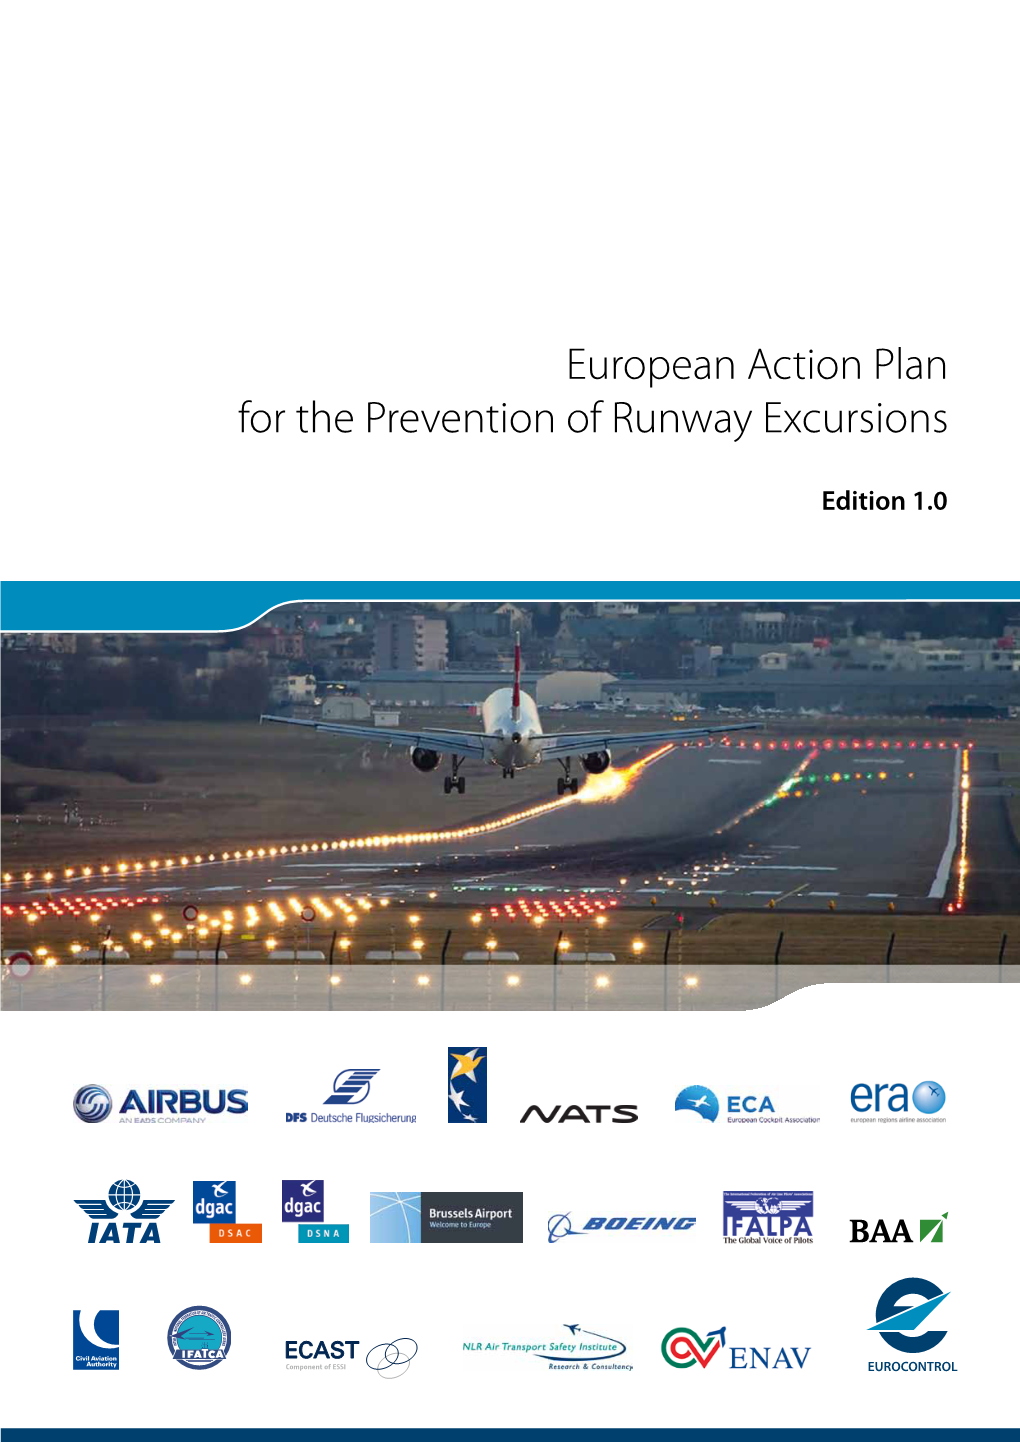 European Action Plan for the Prevention of Runway Excursions